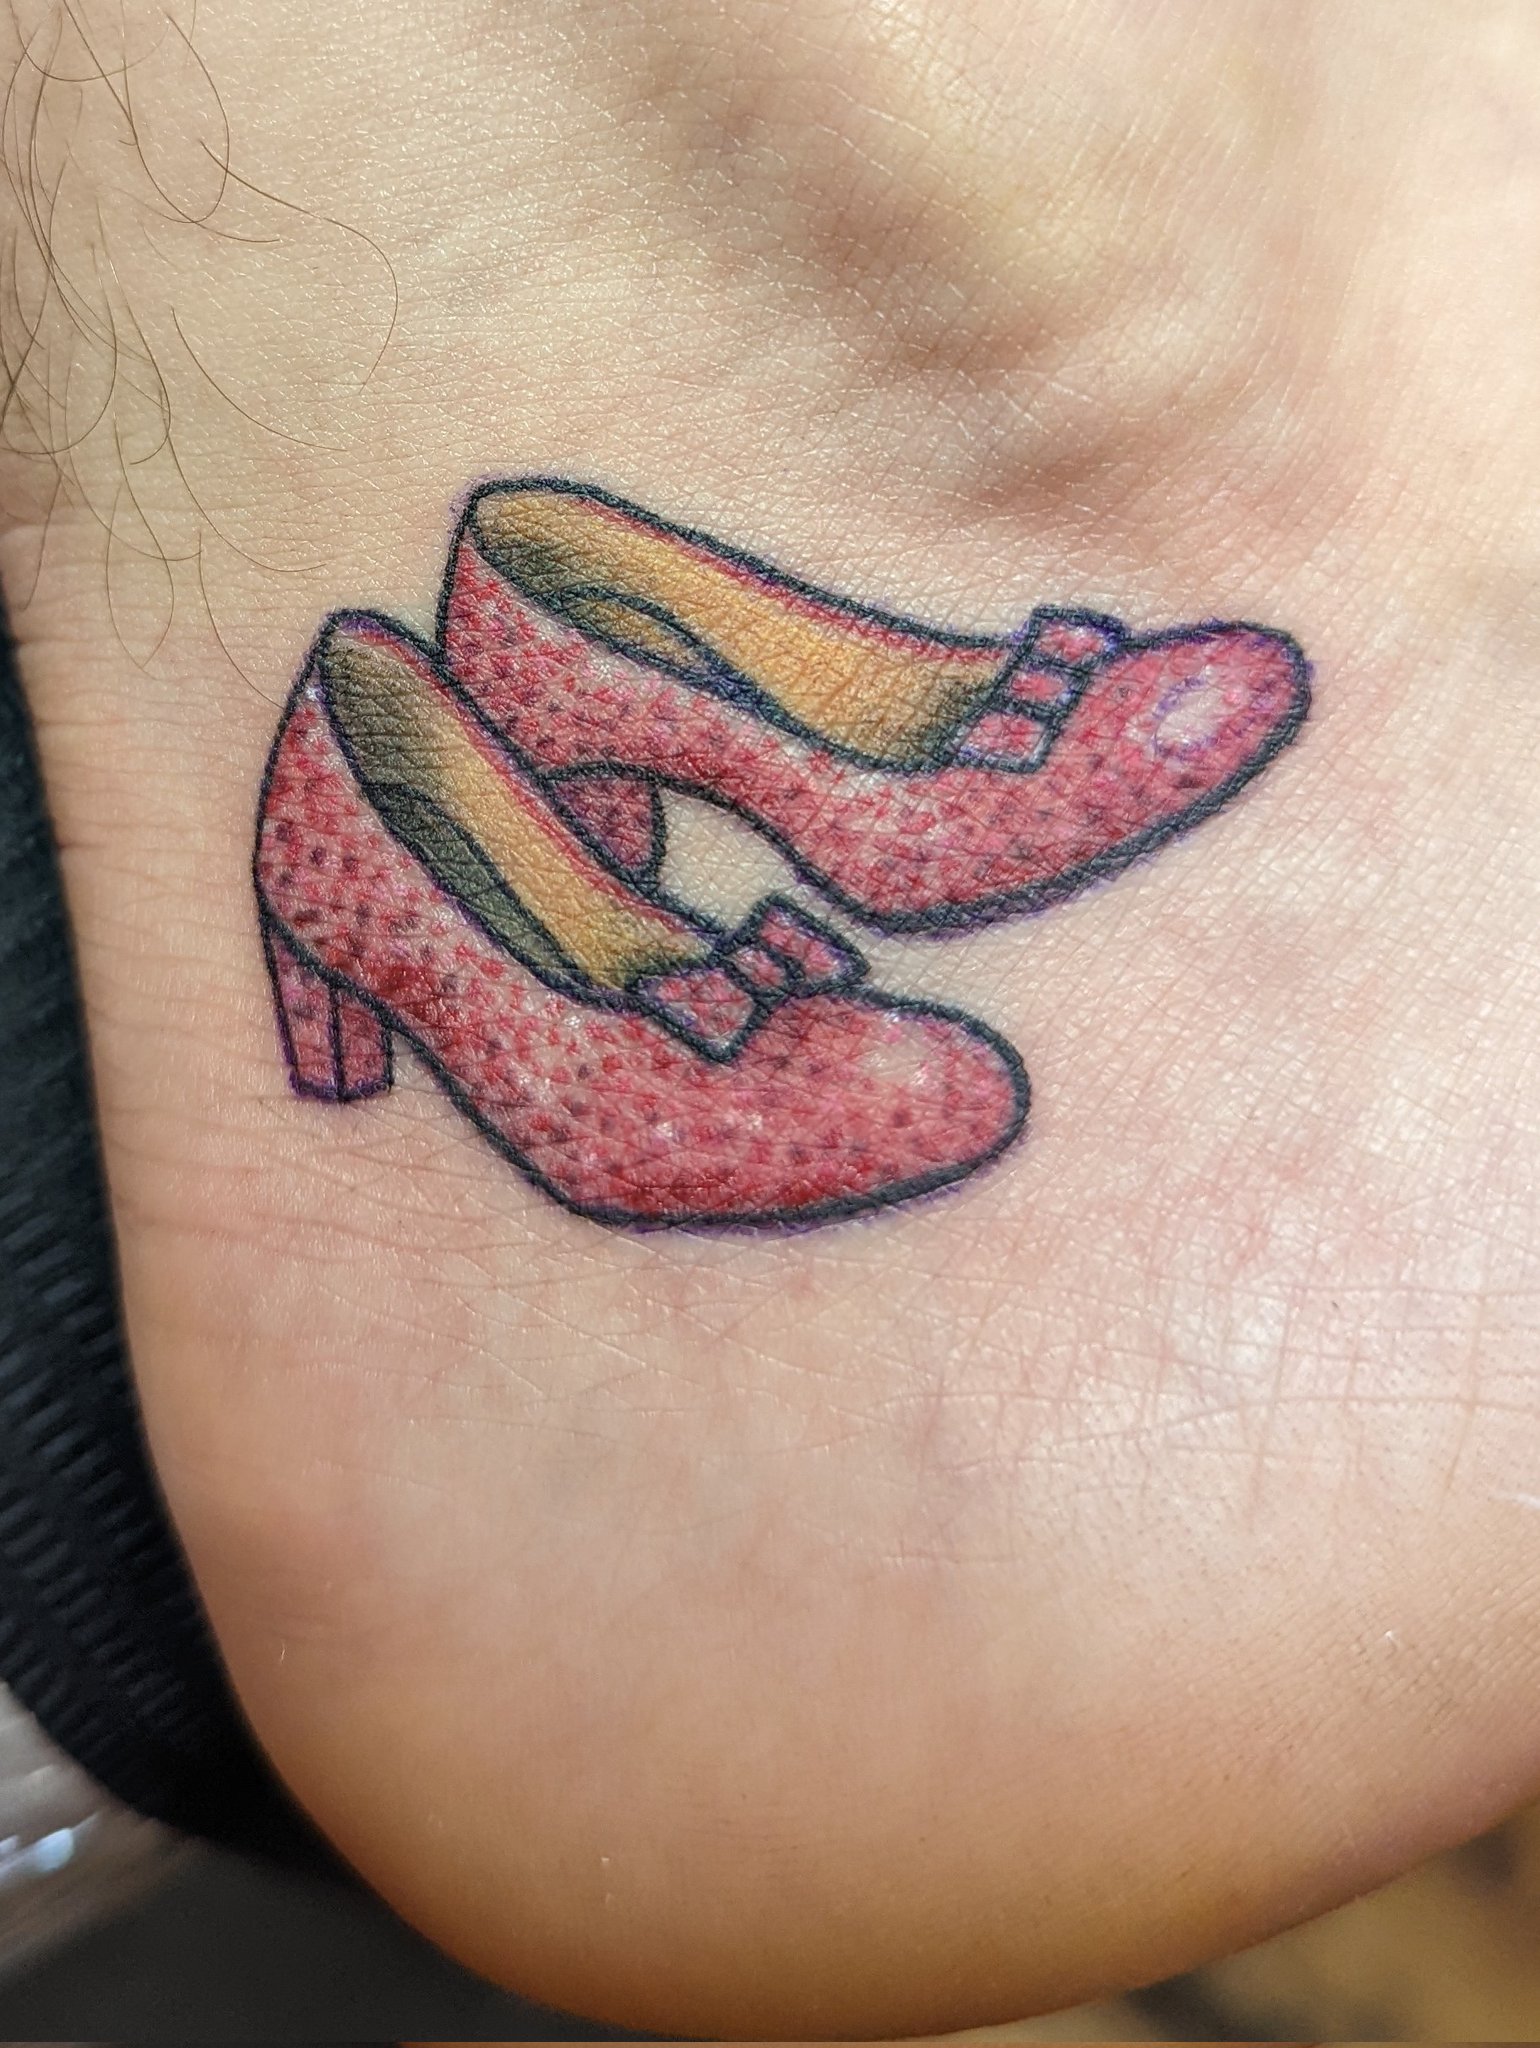 on Twitter: "Not gay in homosexual - queer as in I have a ruby slippers tattoo my ankle 🌈 #friendofdorothy #noplacelikehome #yellowbrickroad #wizardofoz #rubyslippers #myfirsttattoo https://t.co/6SfzZObam8" / Twitter